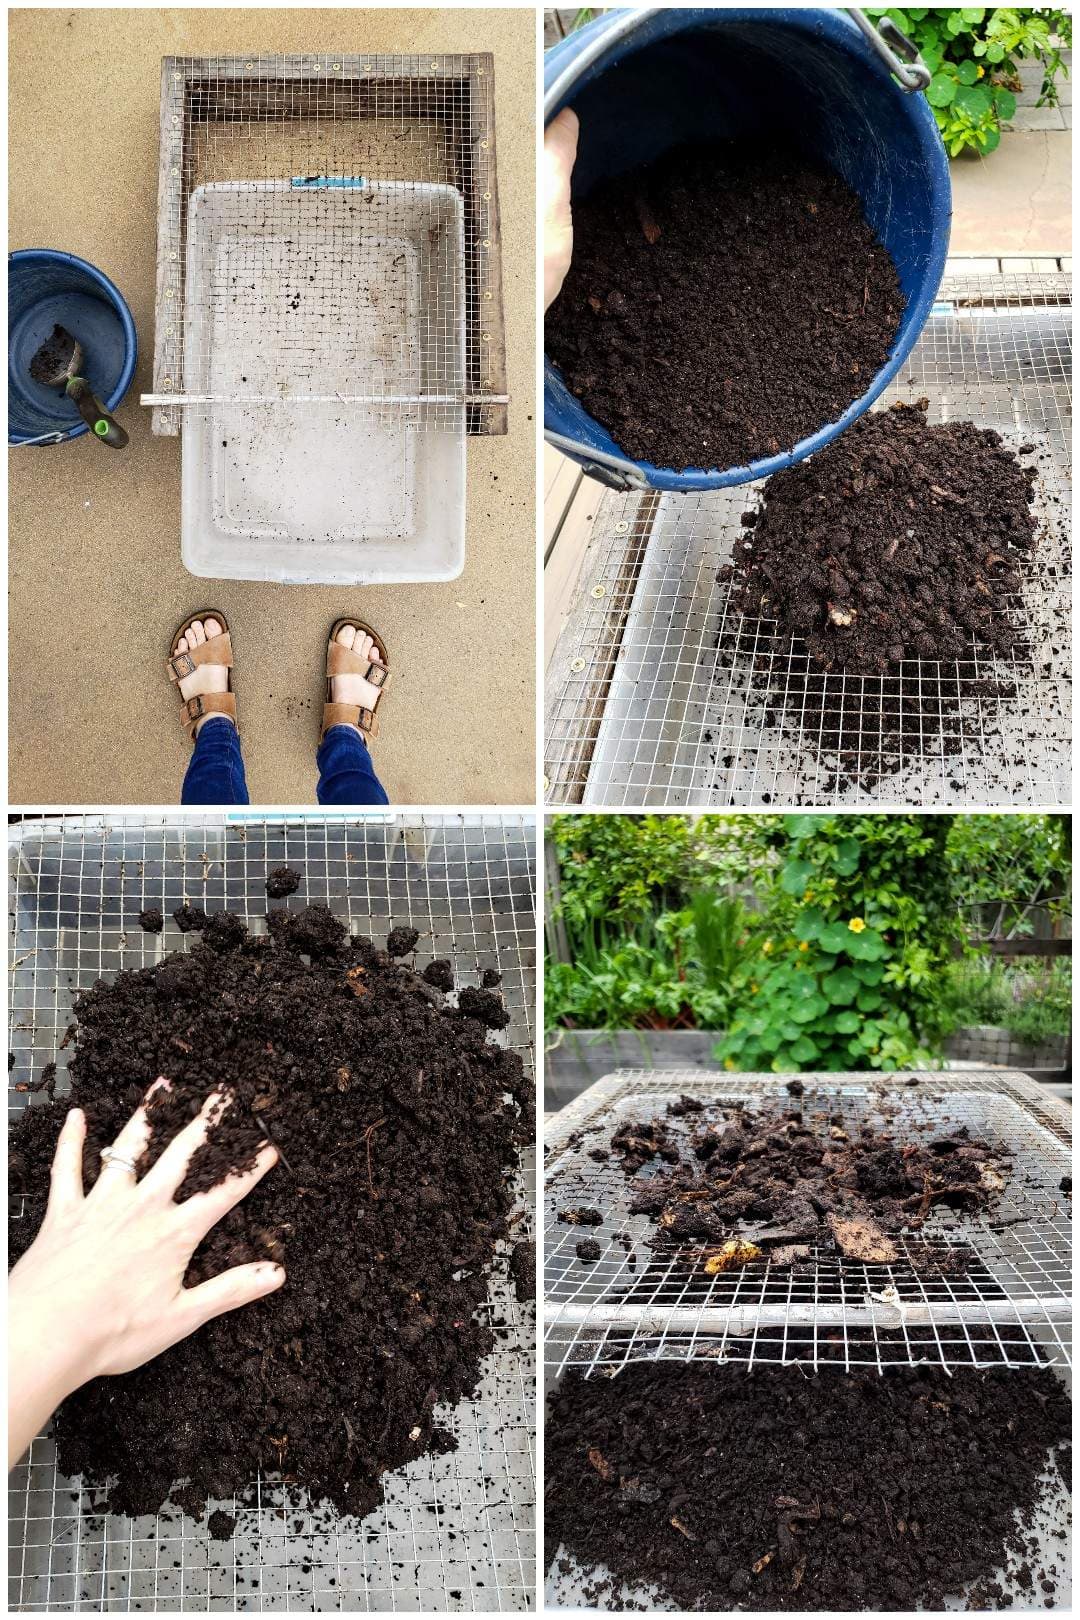 A four part image collage, the first image shows two feet standing next to a small bucket, trowel, bin, and a wood frame box with hardware cloth attached to one side of it. The second image shows a blue bucket of vermicompost being dupled onto the wire cloth with a bin sitting below the wire to catch the screen worm compost. The third image shows a hand working the castings back and forth to sift the vermicompost from the vegetable waste that still remains. The fourth image shows the larger vegetable material sitting on top of the   hardware cloth as it wouldn't fit through the wire mesh while the worm castings have been sifted through the metal cloth and now reside in the plastic catchment bin below. That is how one harvests worm castings after the worms have made compost for you. 